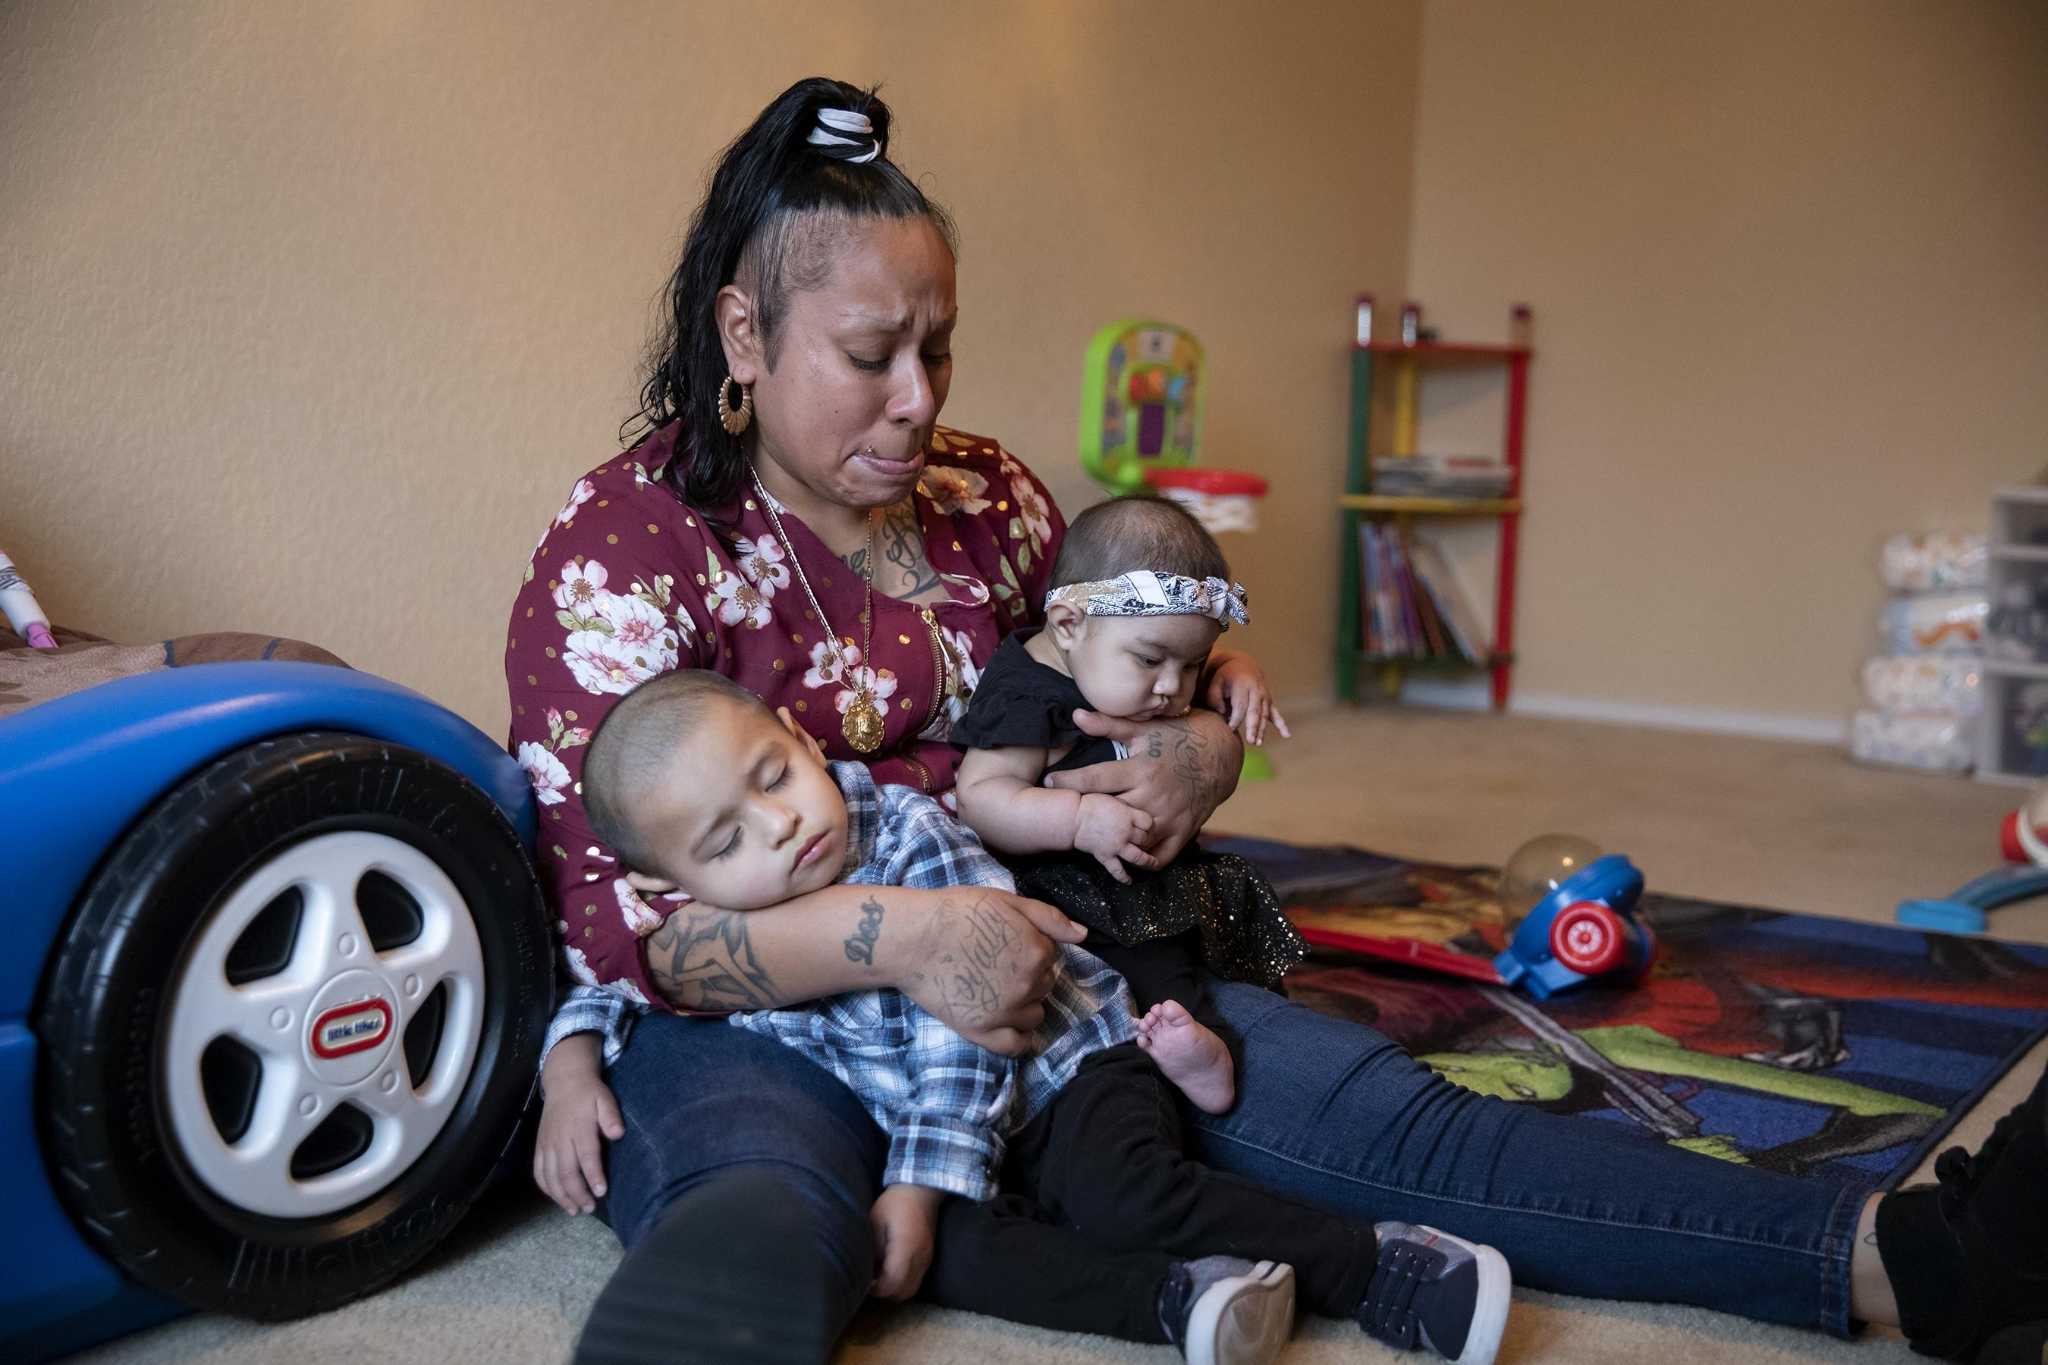 ‘I didn’t know my worth:’ San Antonio mom reflects on drug abuse. lost kids and recovery